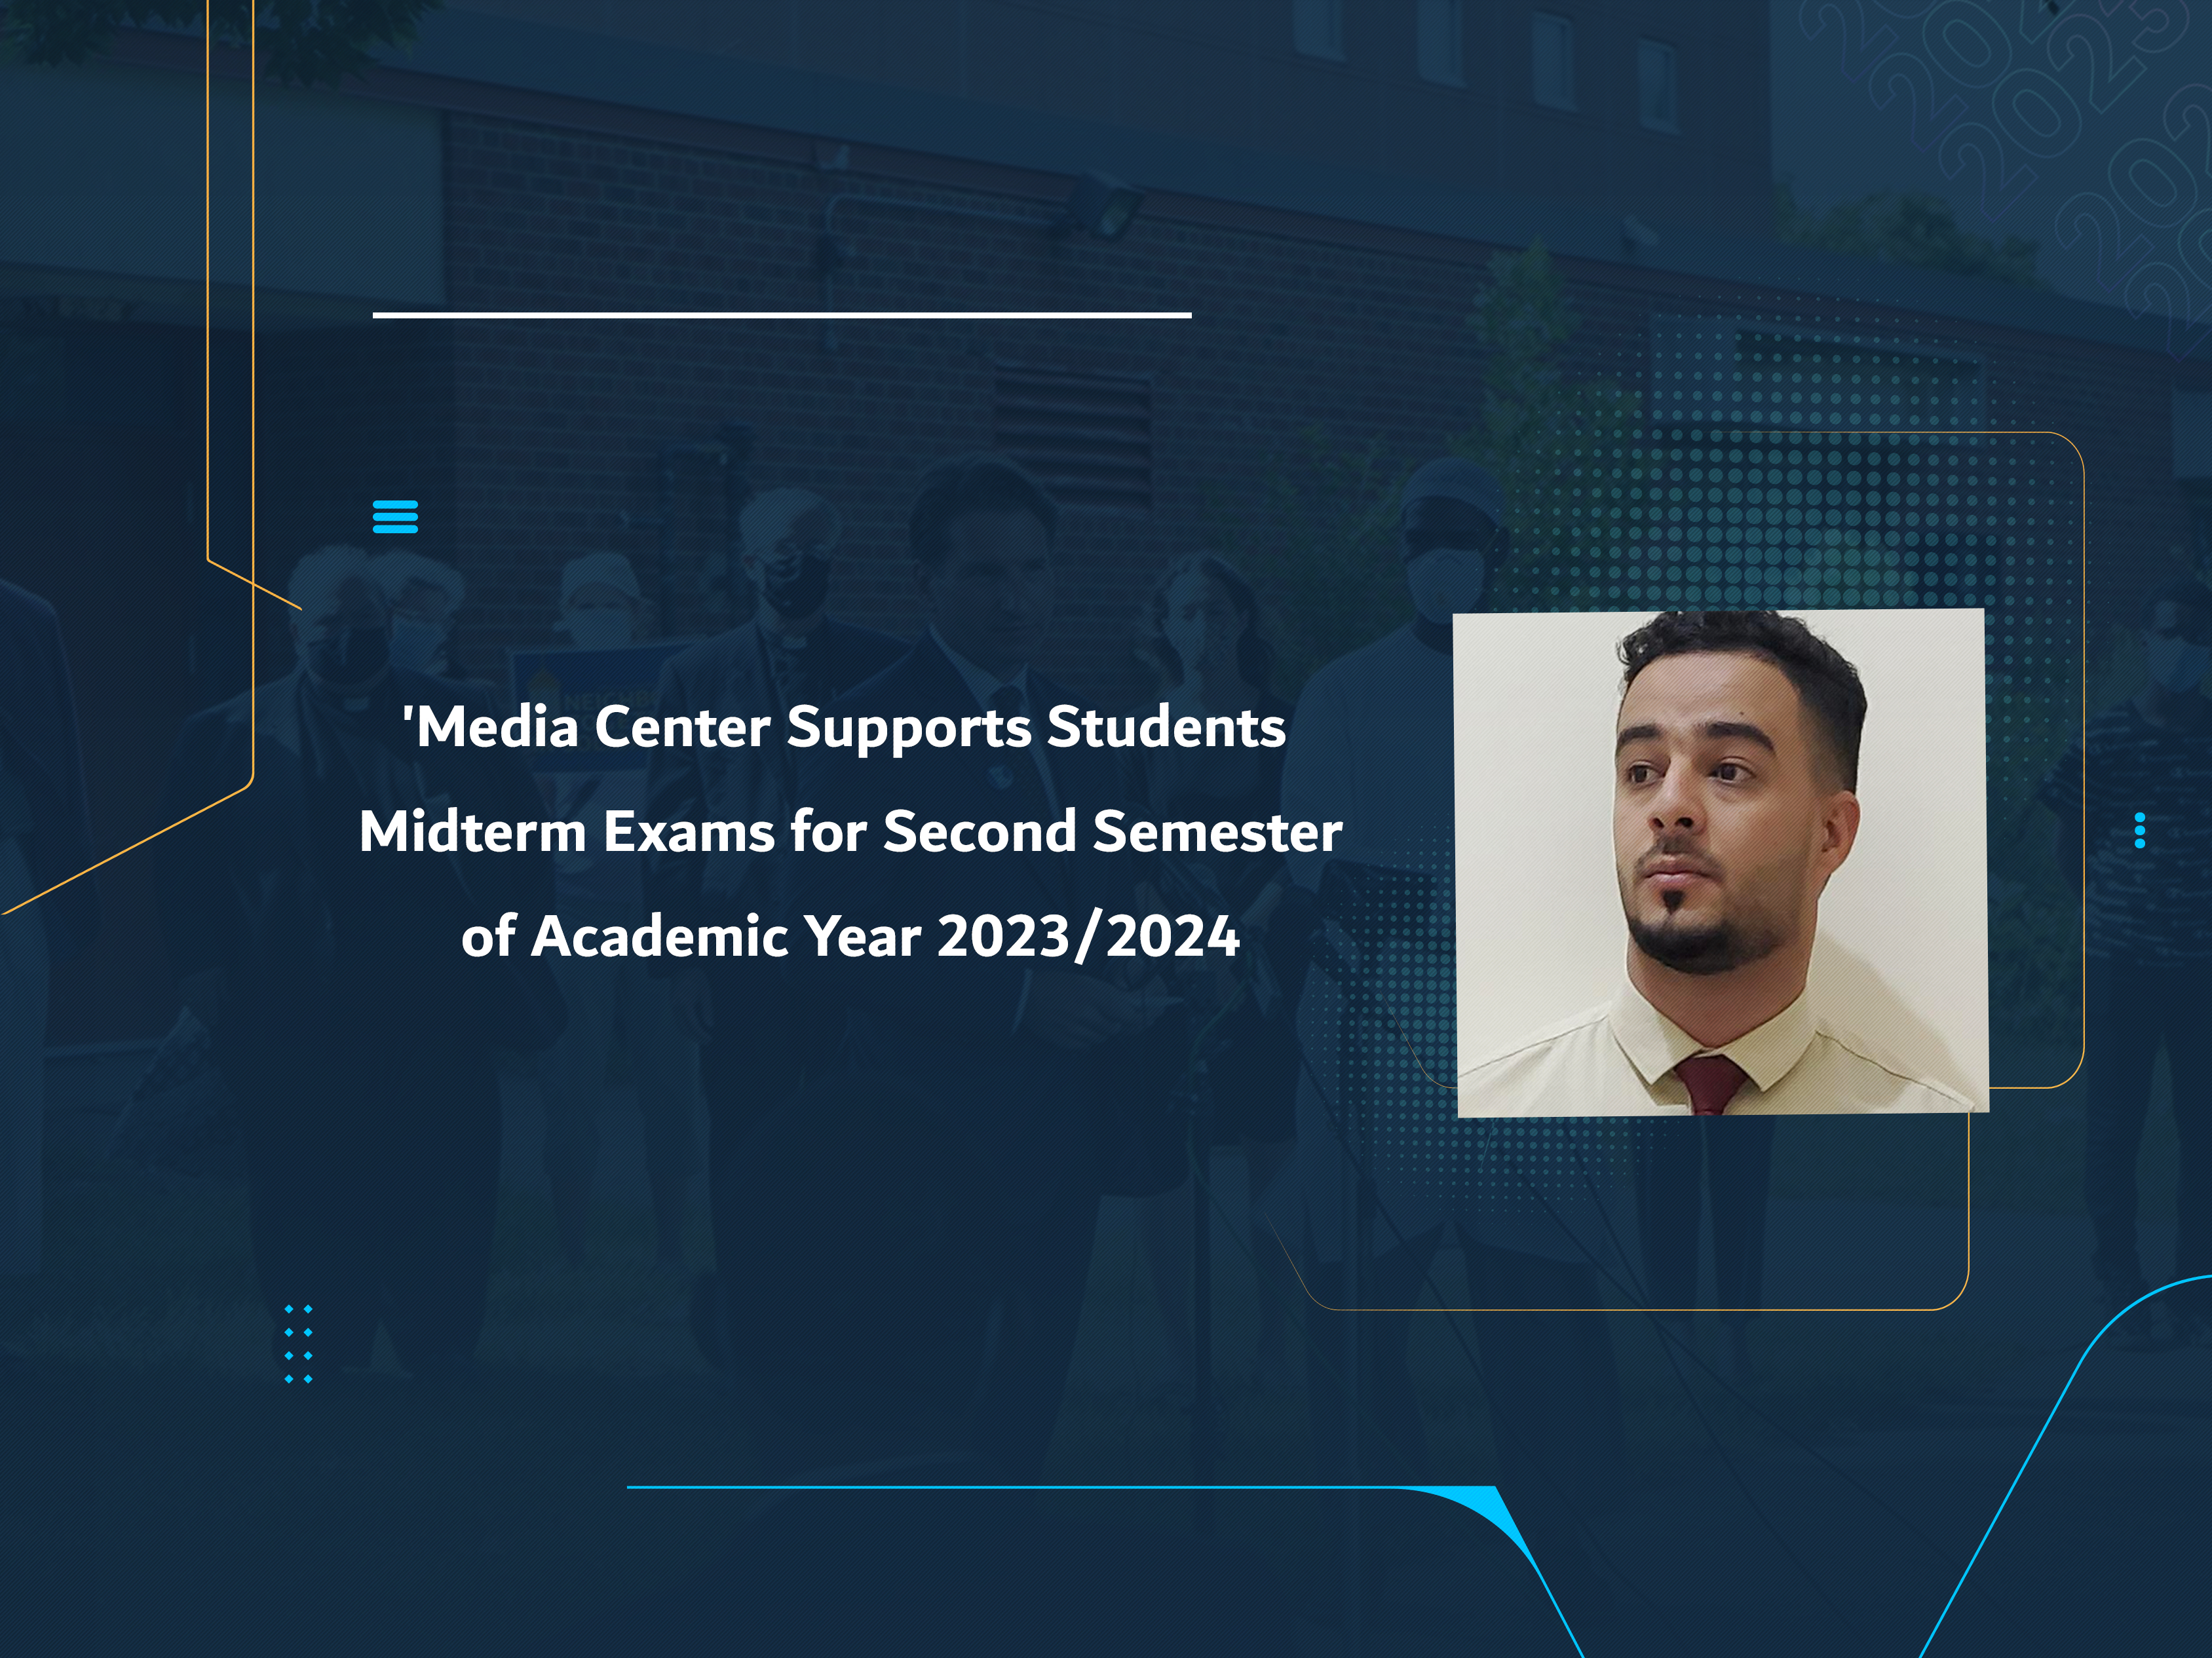 Media Center Supports Students' Midterm Exams for Second Semester of Academic Year 2023/2024